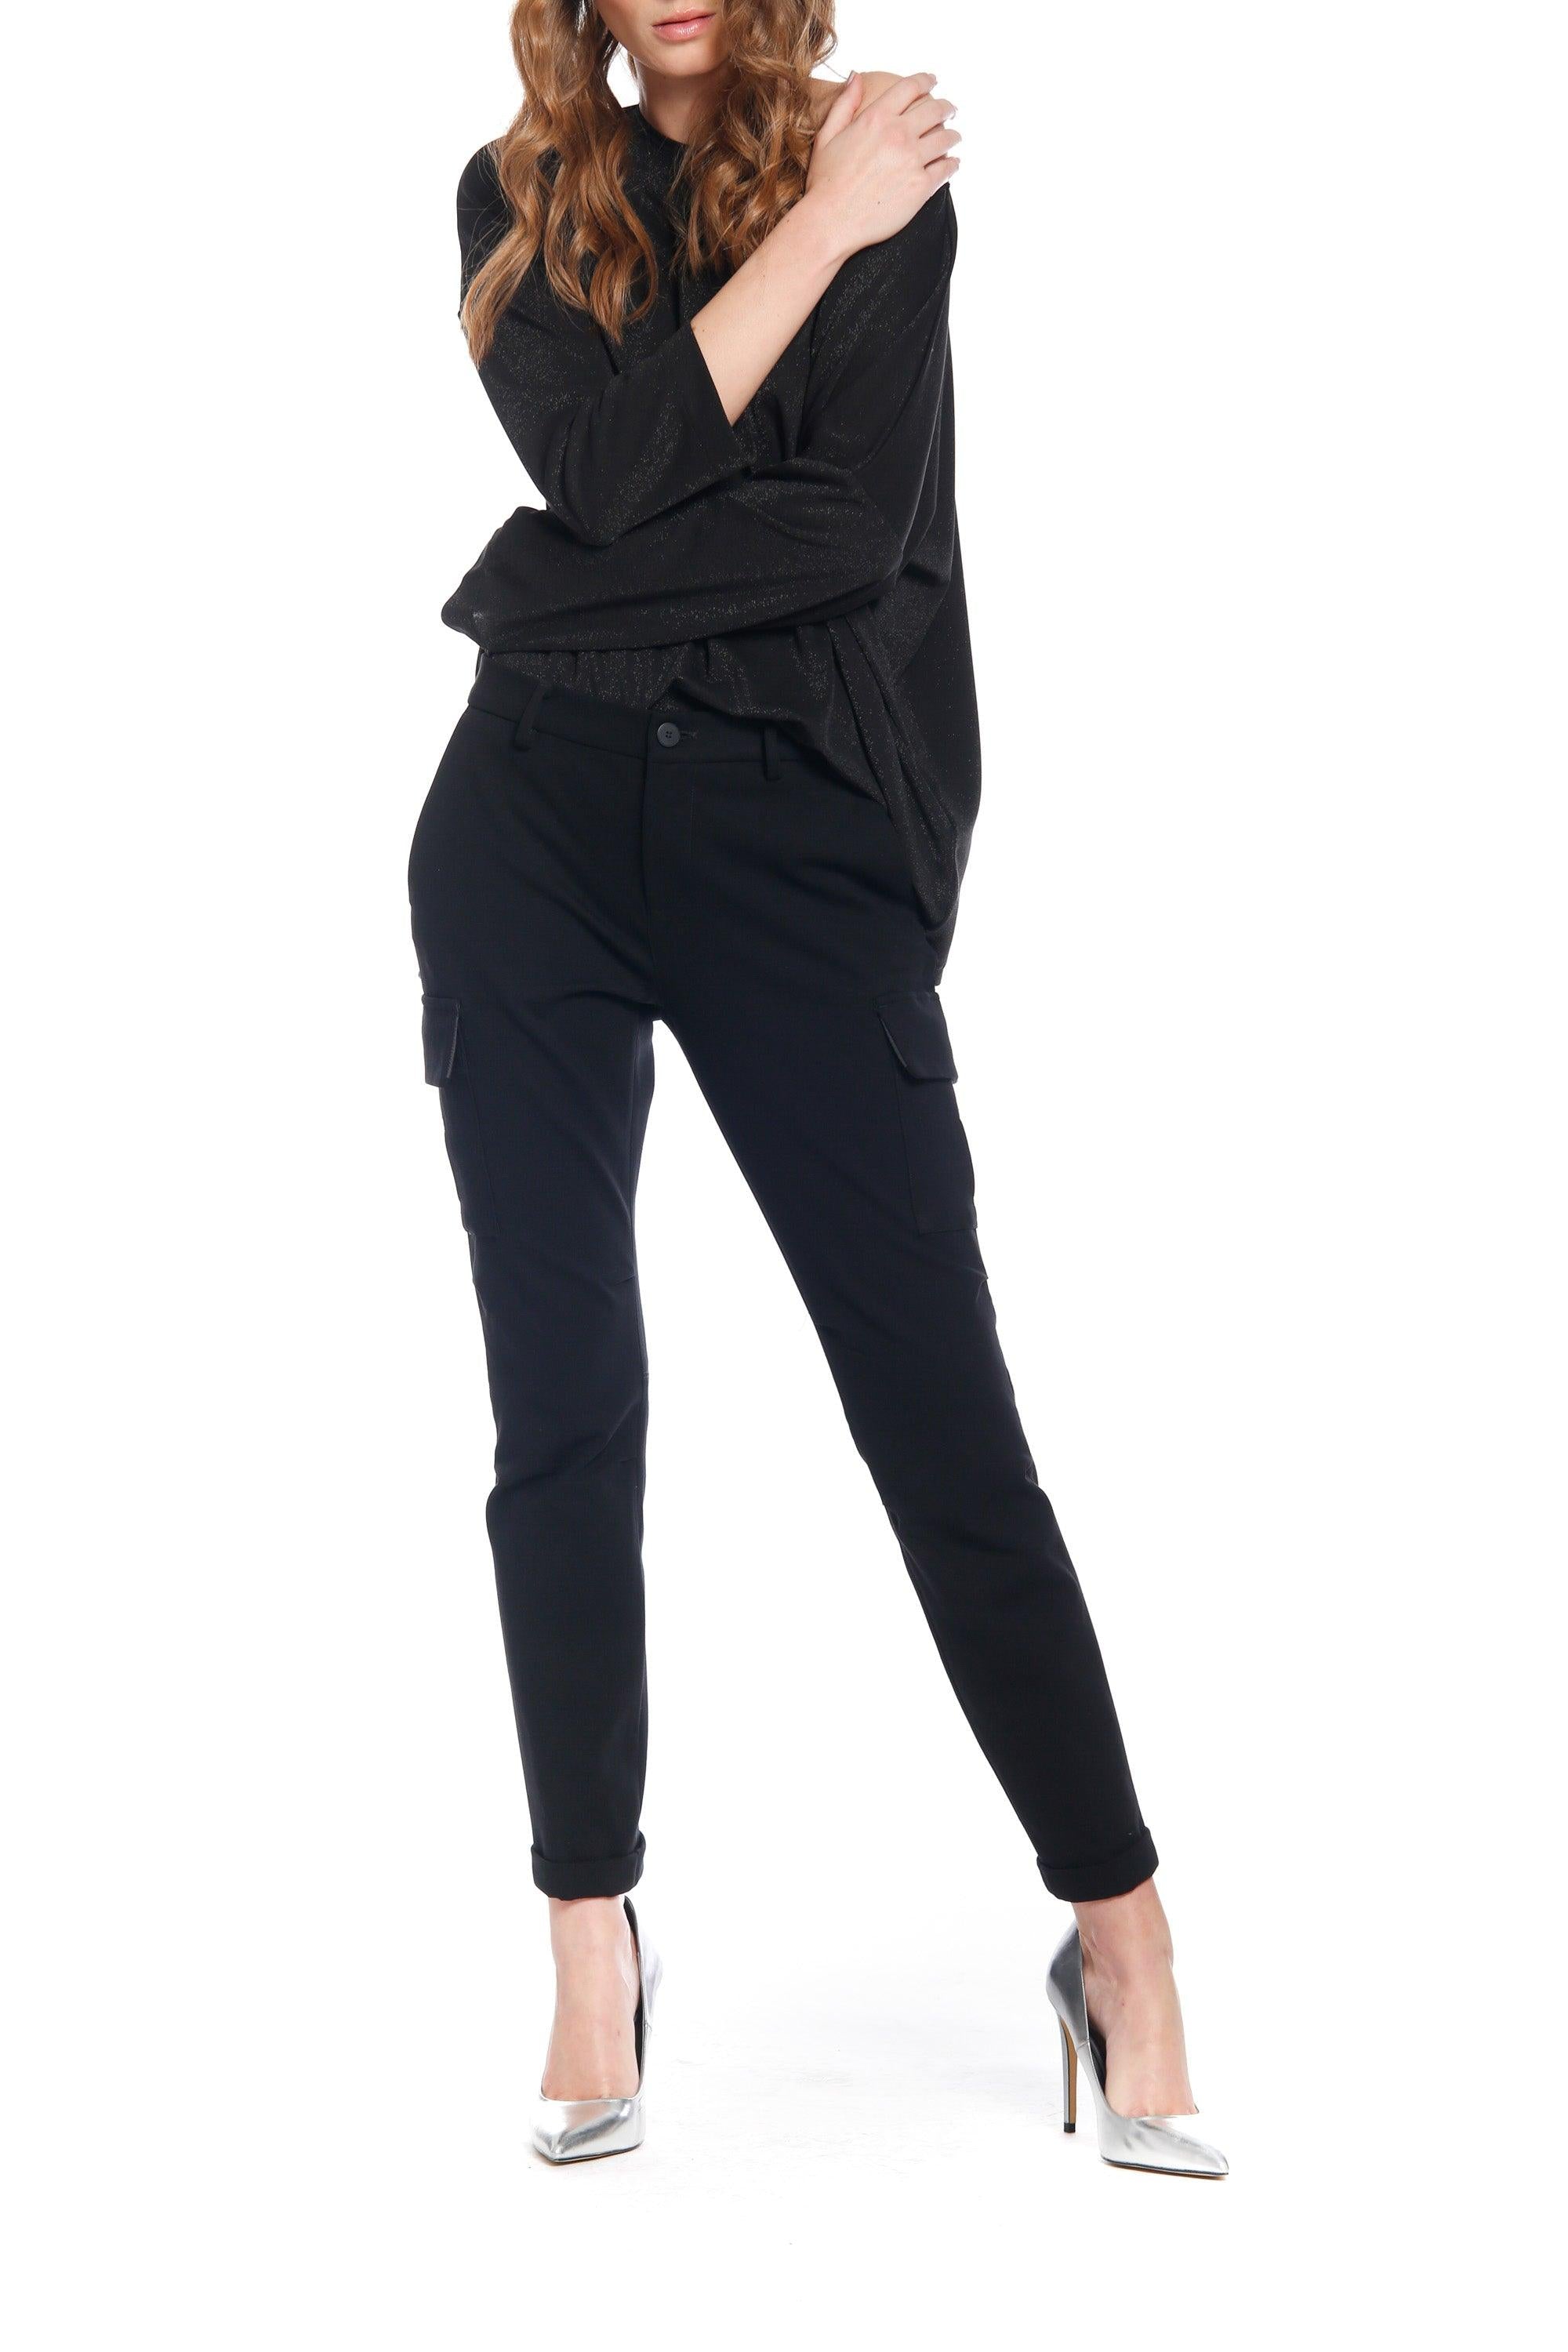 picture 2 of women's Chile City cargo pants in black jersey by Mason's